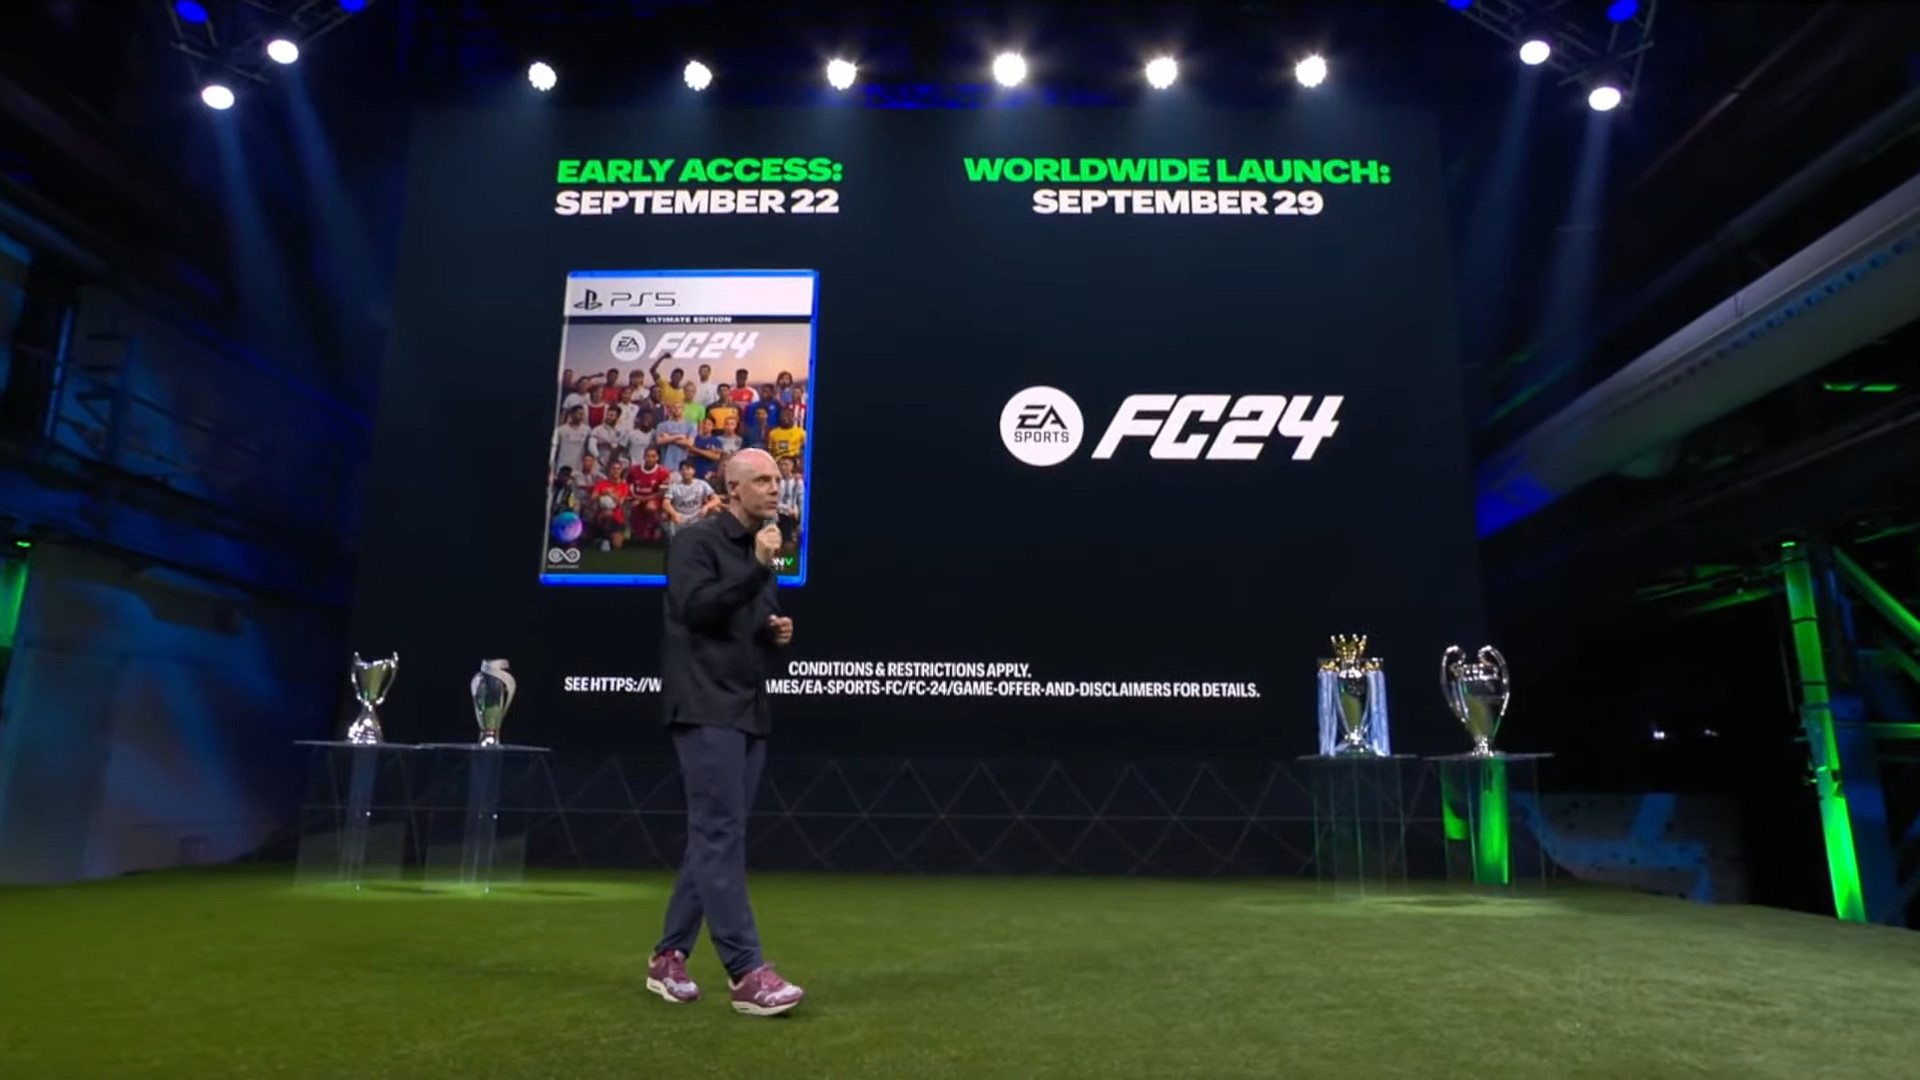 EA Sports FC: Latest leaks reveal the release date - The SportsRush